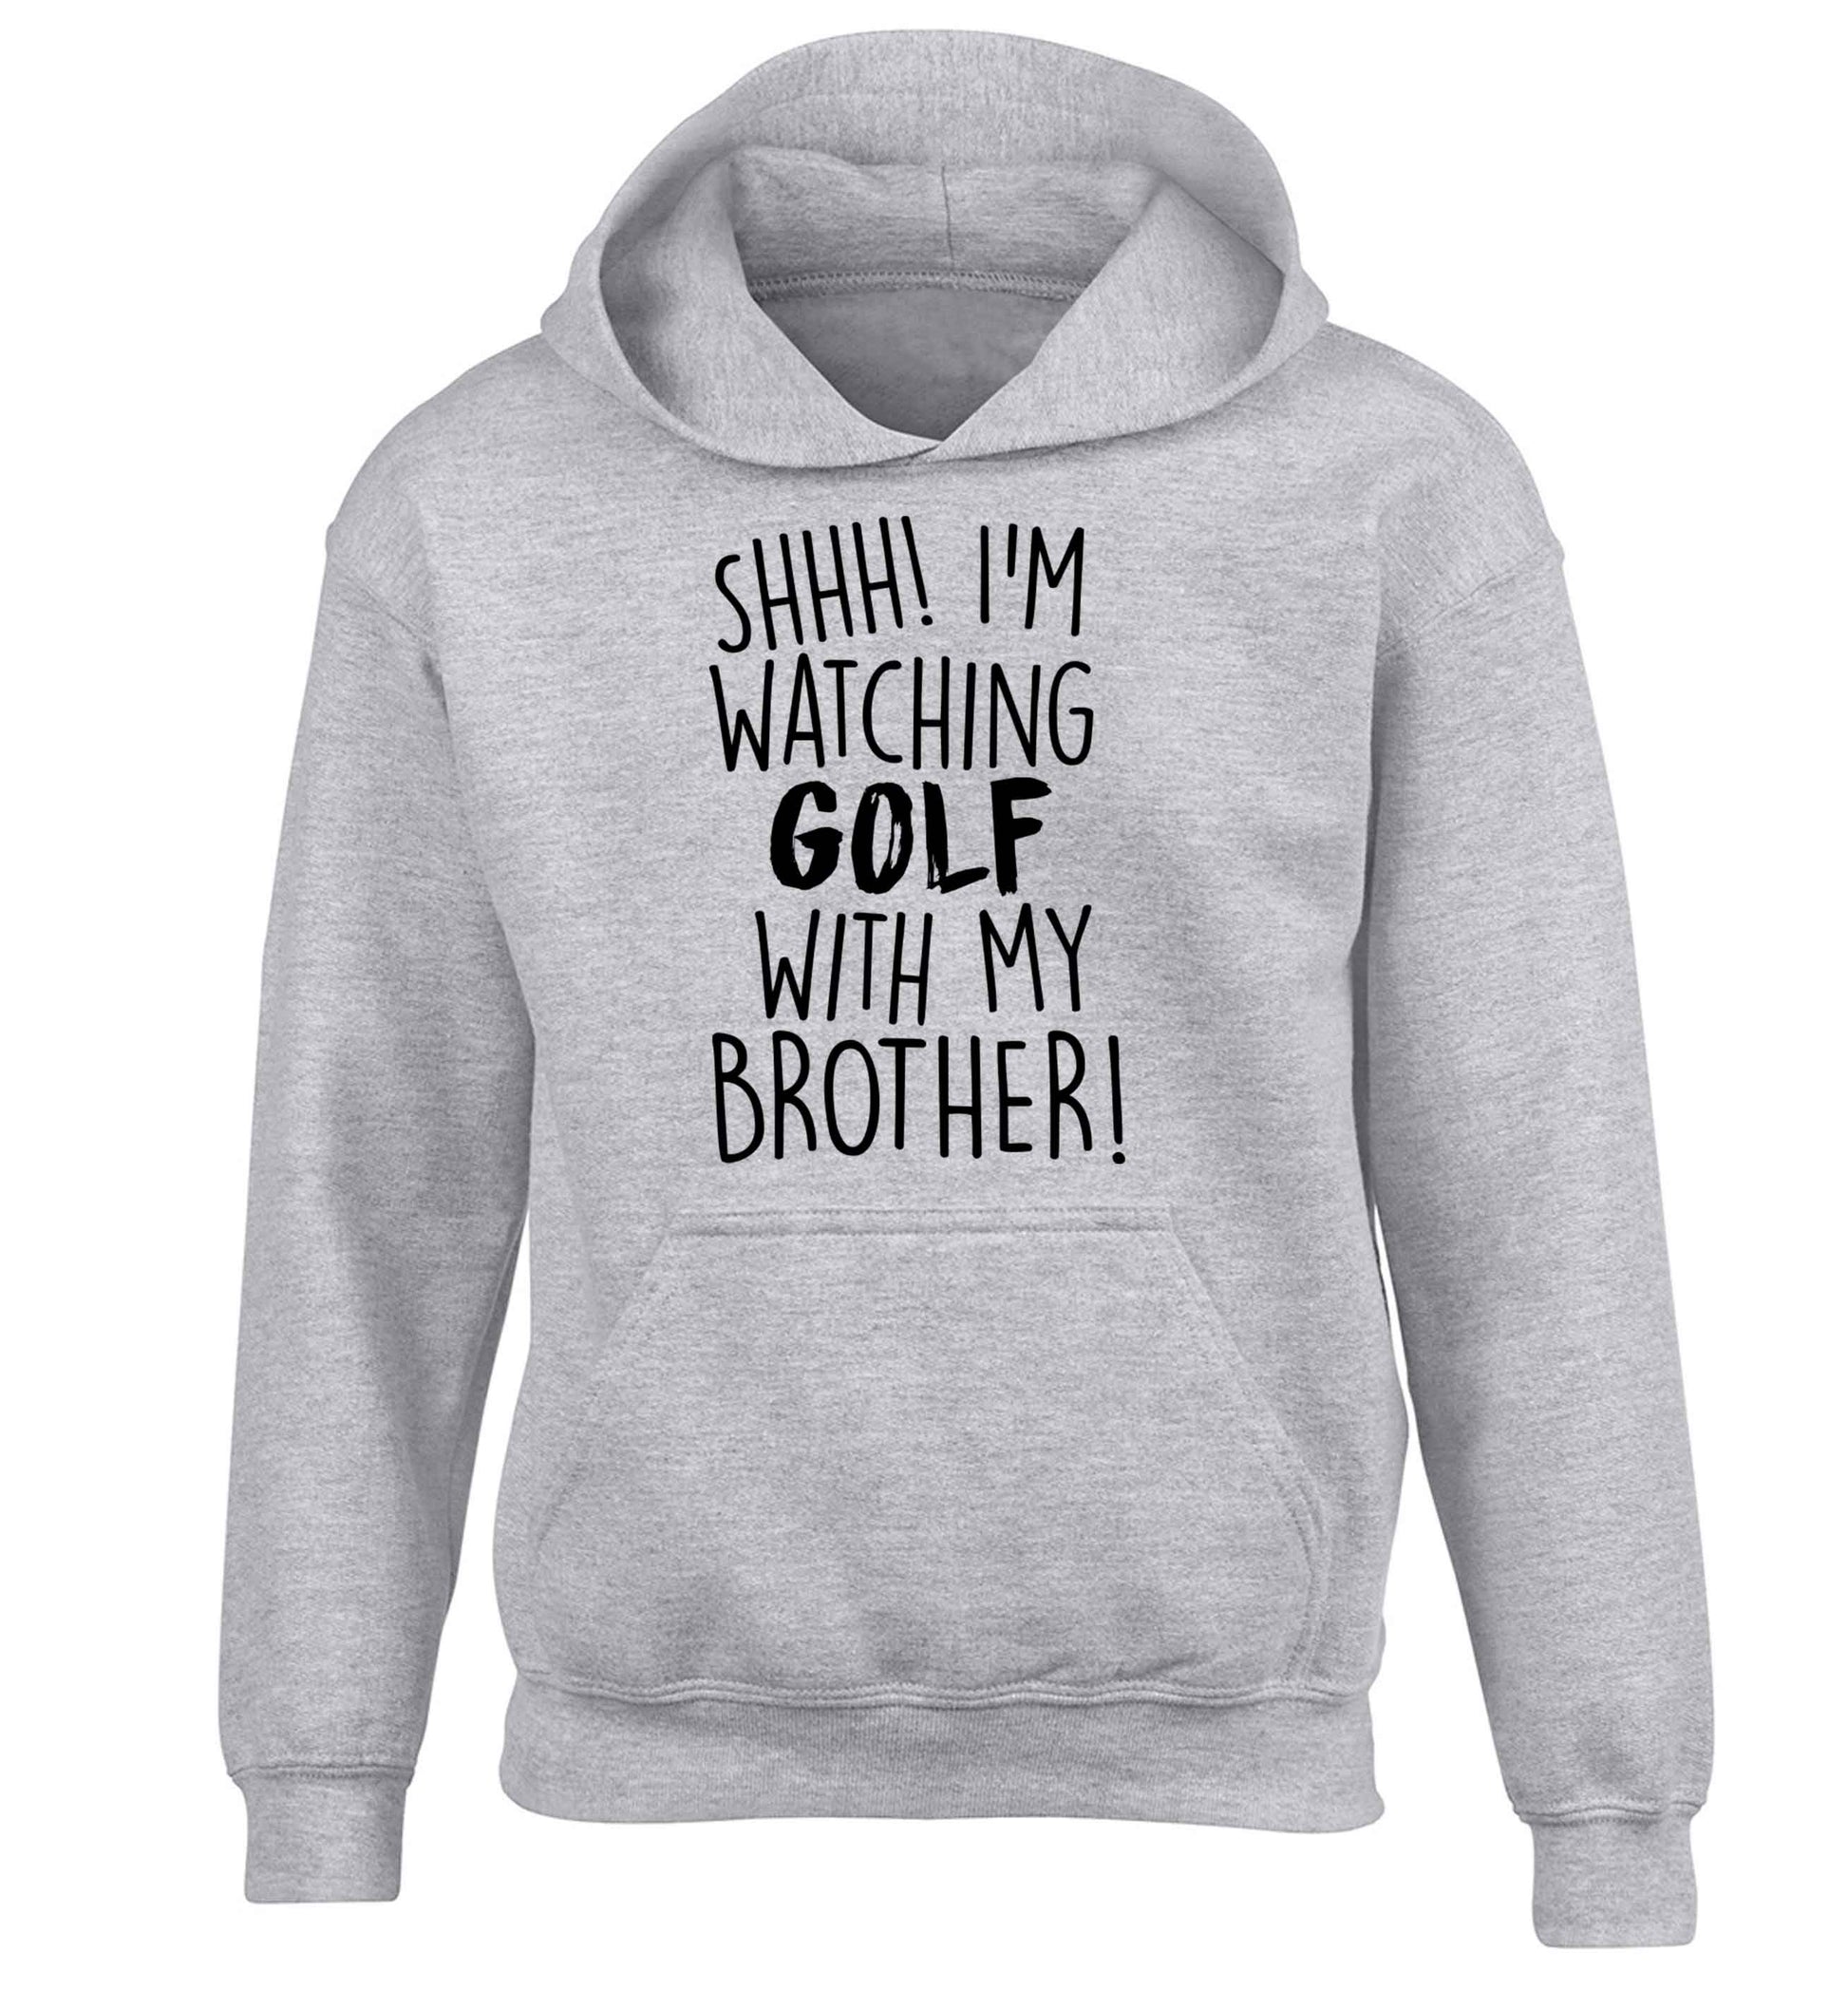 Shh I'm watching golf with my brother children's grey hoodie 12-13 Years